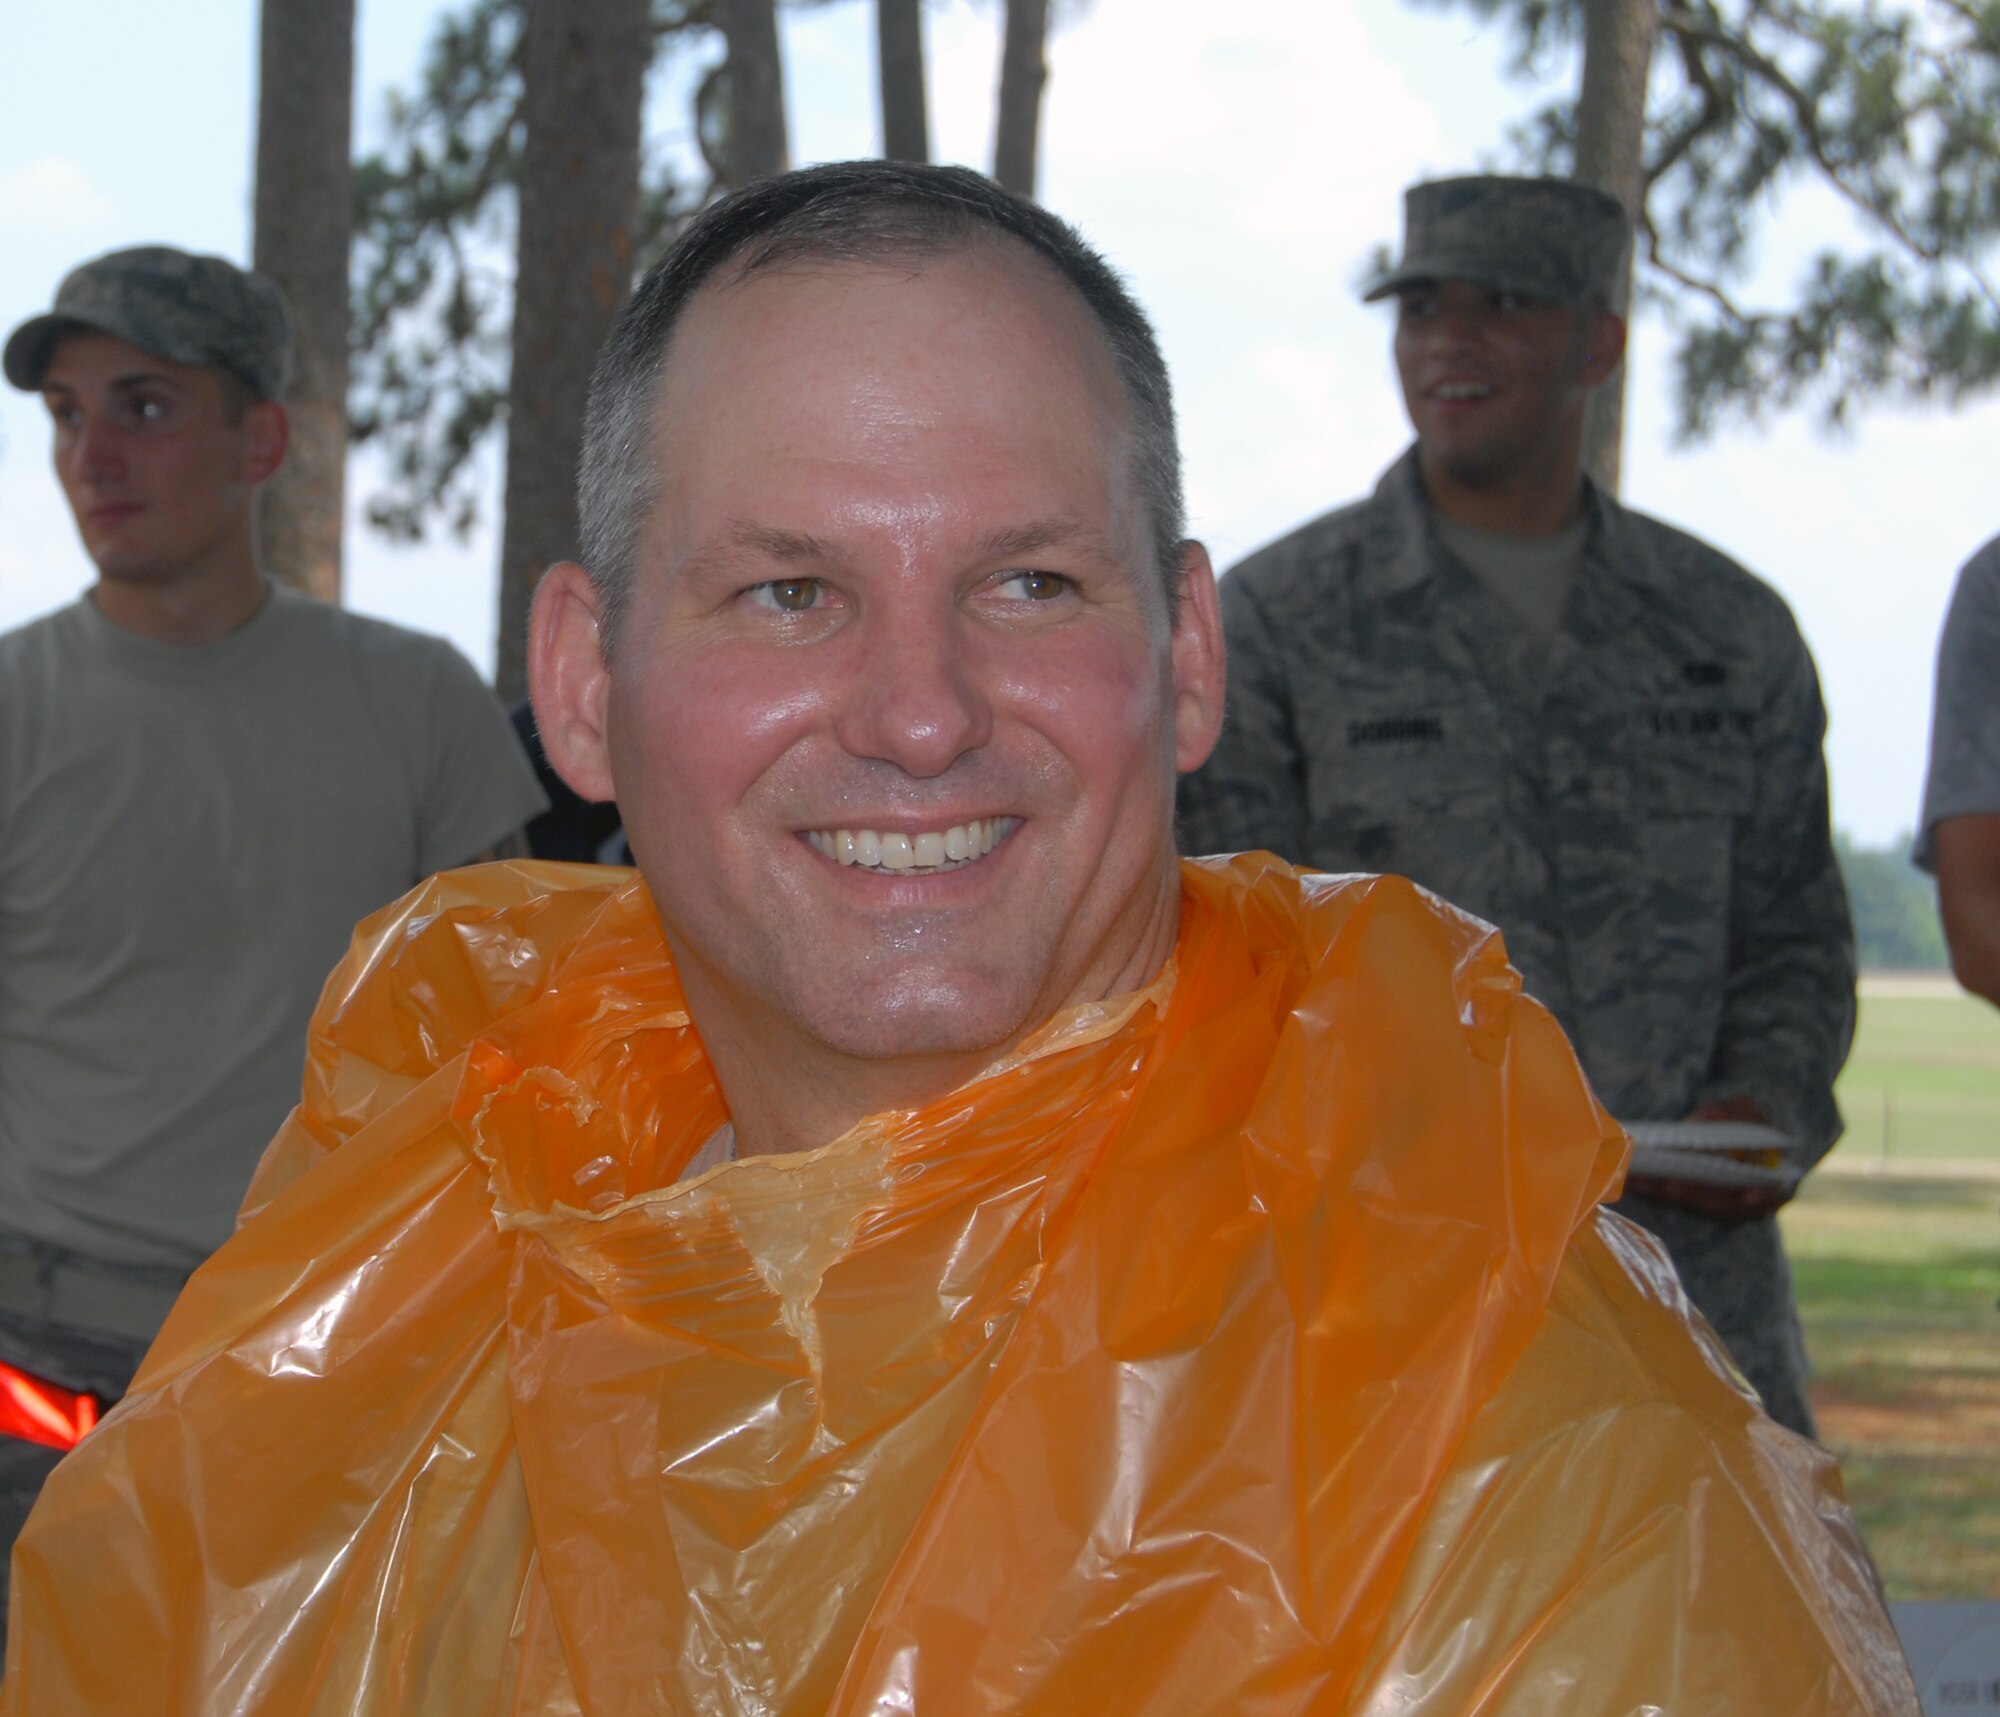 Chief Master Sgt. Patton Scales, 3rd Aerial Port Squadron superintendent, prepares to have his head shaved during a squadron picnic June 25 at Woodland Park, here. Chief Scales, Lt. Col. Frank Flores, 3rd APS commander, and Edwin Byrnes, 3rd APS assistant director of operations, agreed to shave their heads provided the squadron scored an "outstanding” in a recent inspection. (U.S. Photo/ 1st Lt. Cammie Quinn)